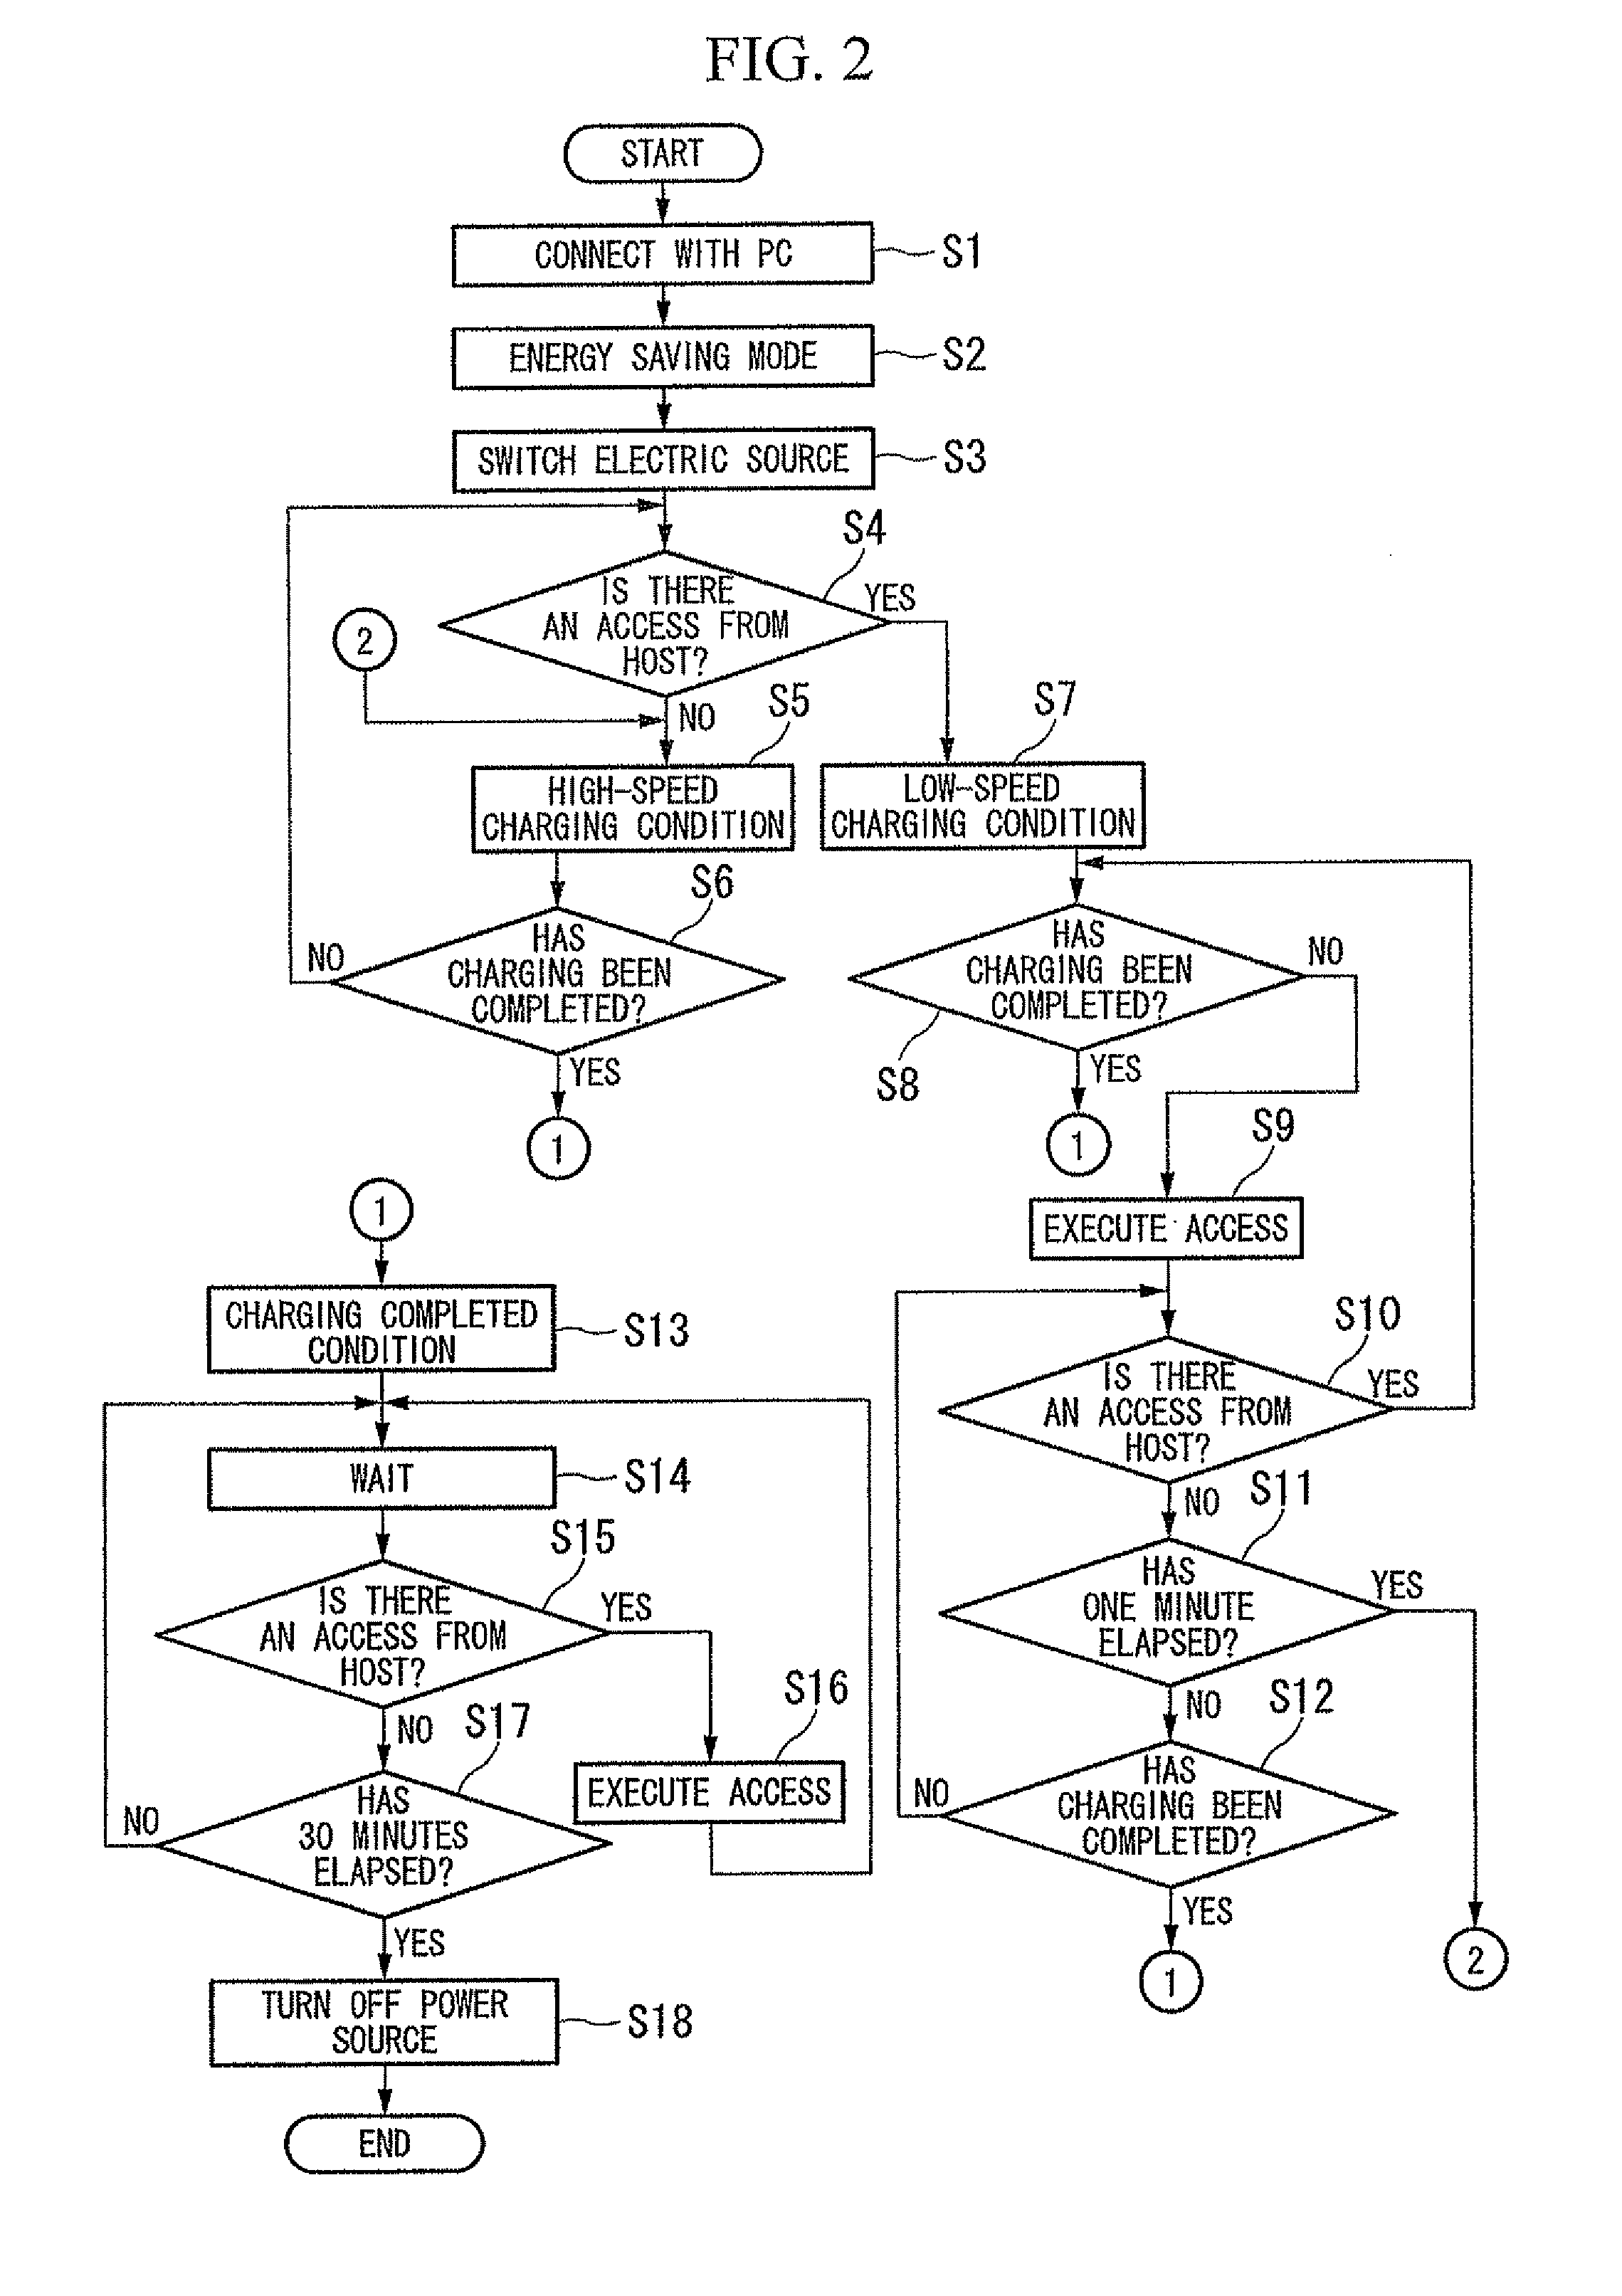 Electronic device, and method controlling electronic power supply